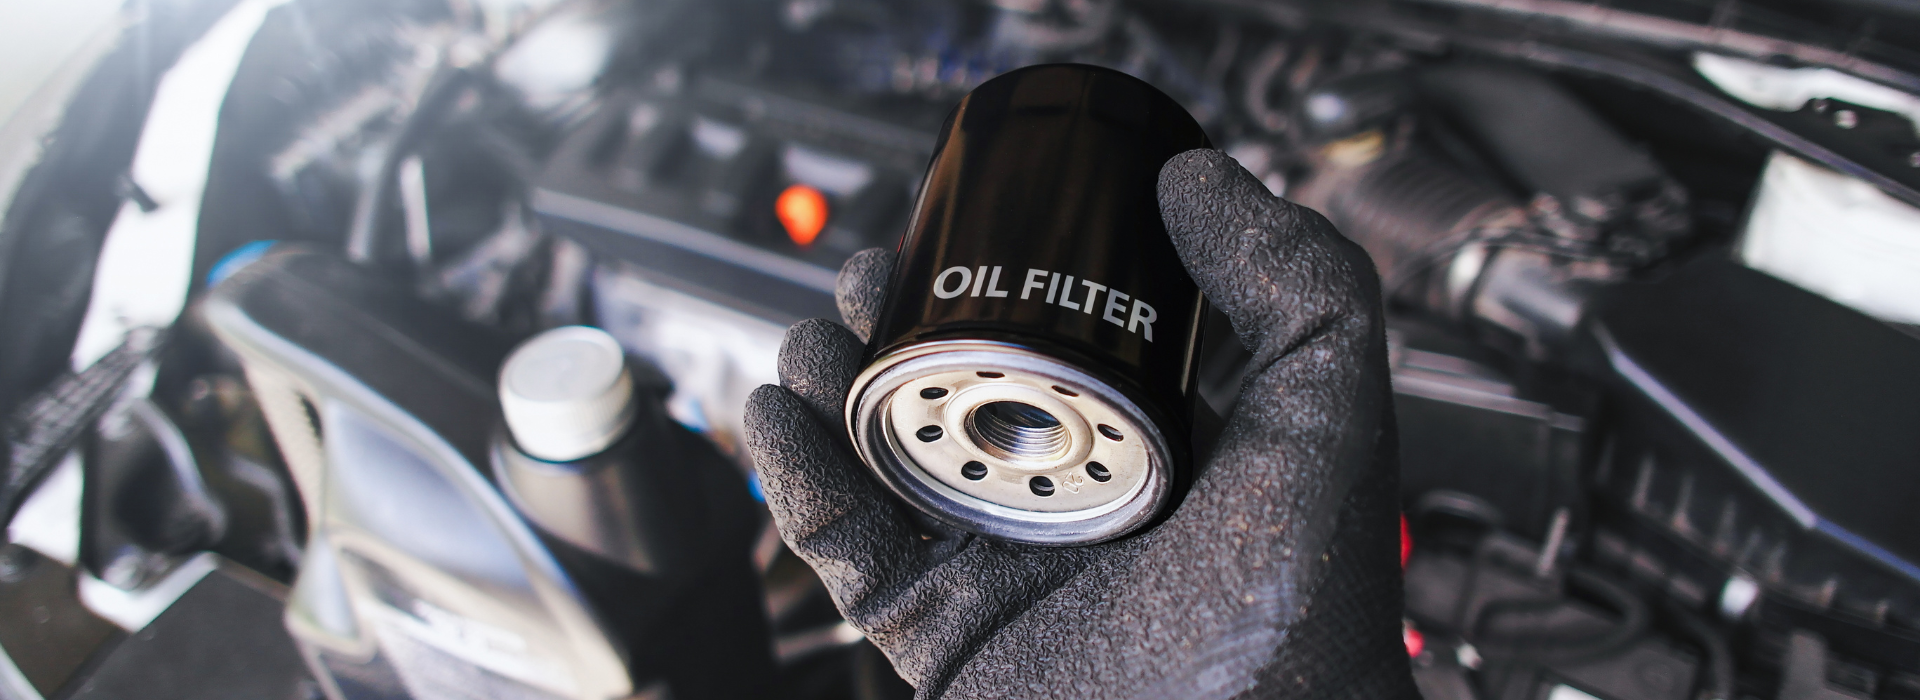 The Essential Guide: How Often Should You Change Your Car's Oil Filter?